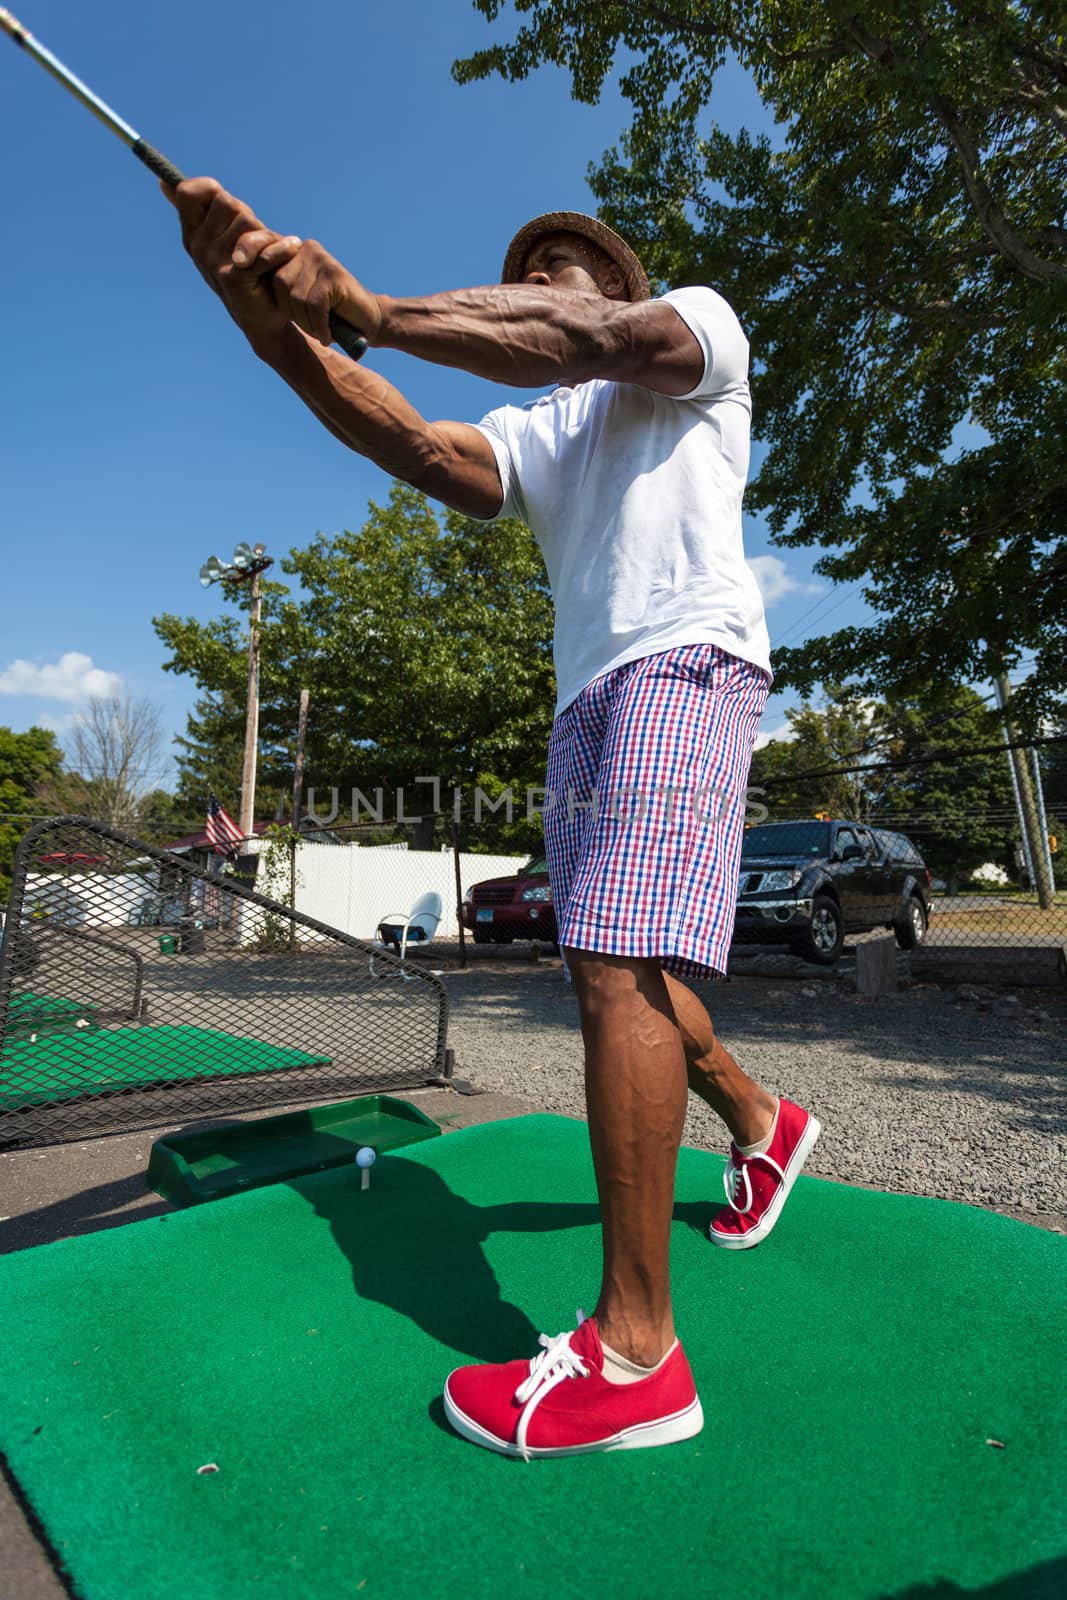 Golf Swing at the Range by graficallyminded